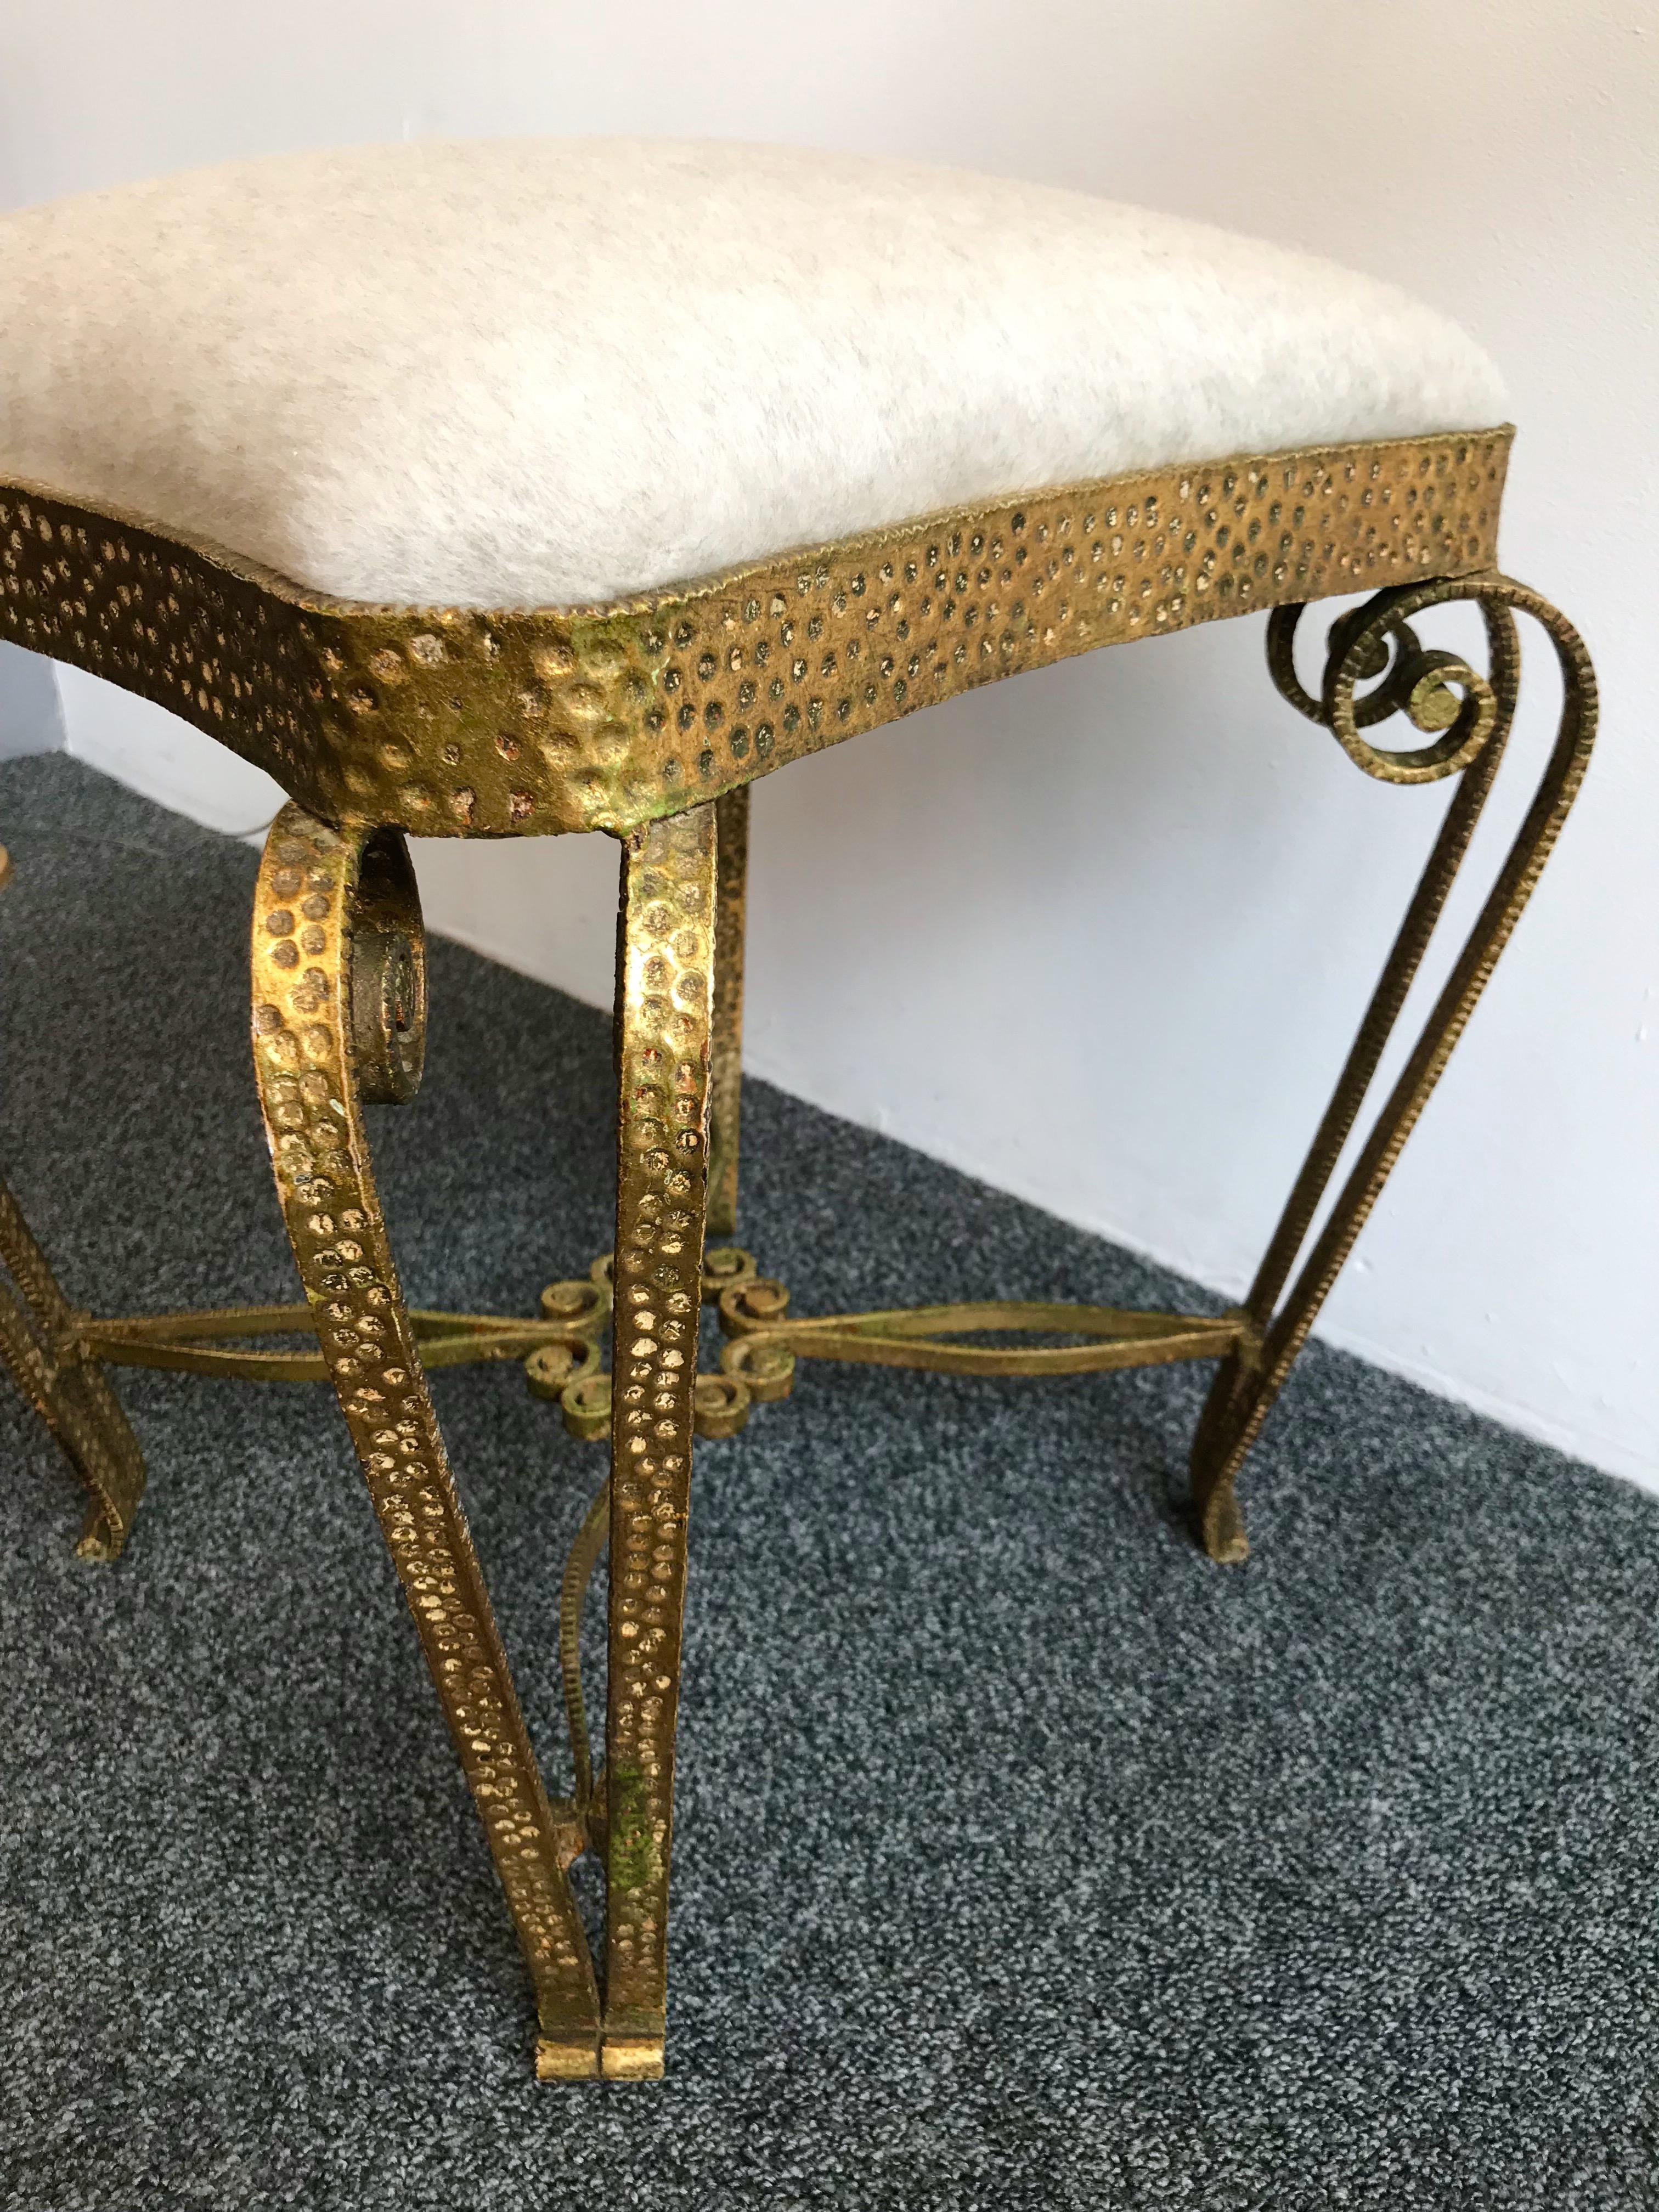 Mid-Century Modern Pair of Stools Gold Leaf by Pier Luigi Colli, Italy, 1950s